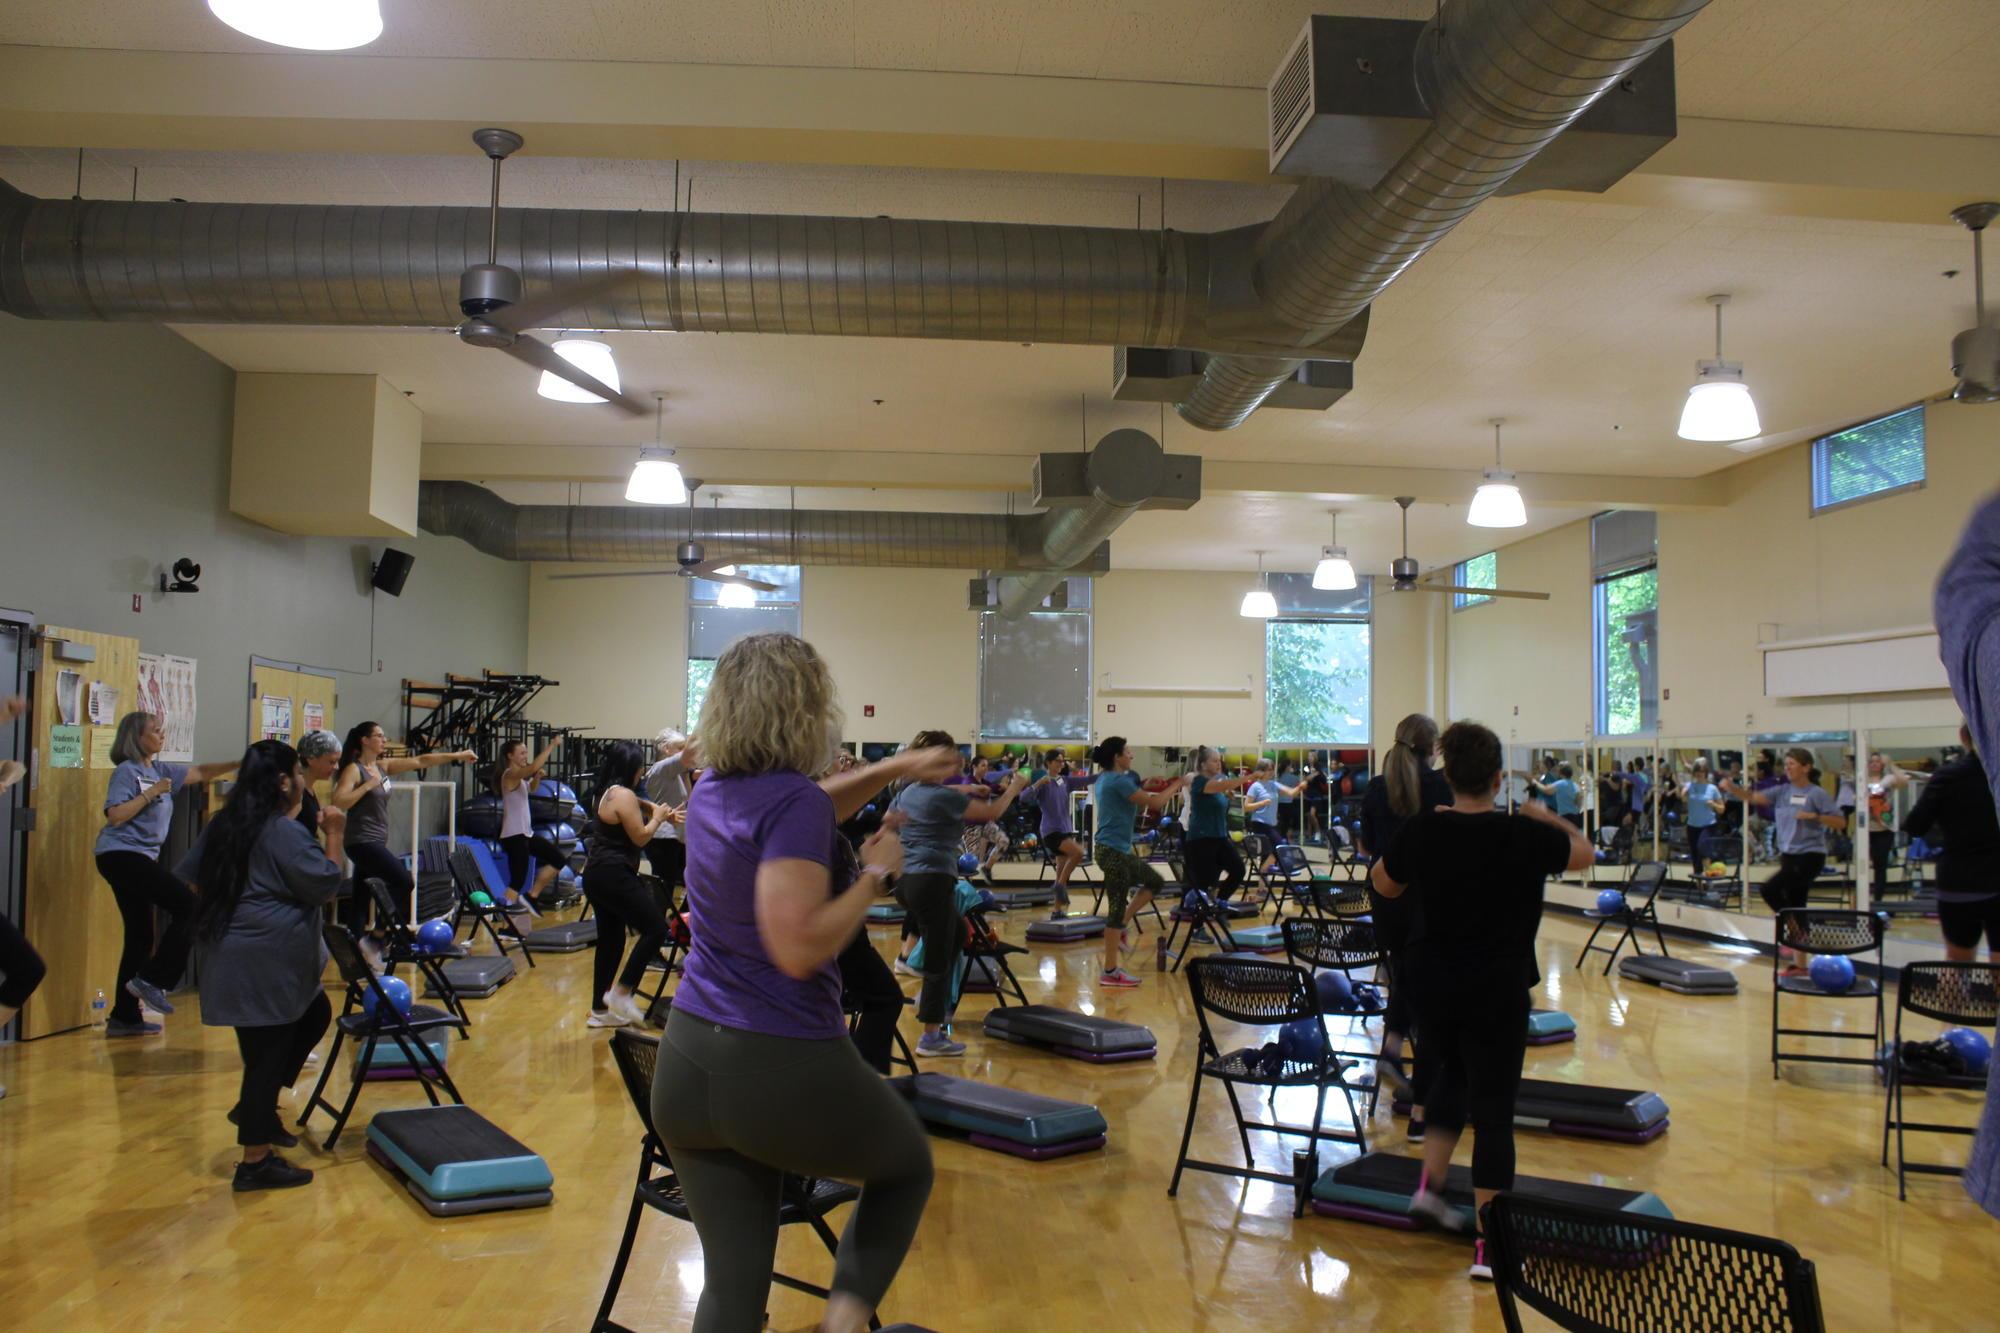 Gym full of individuals participating in an exercise class